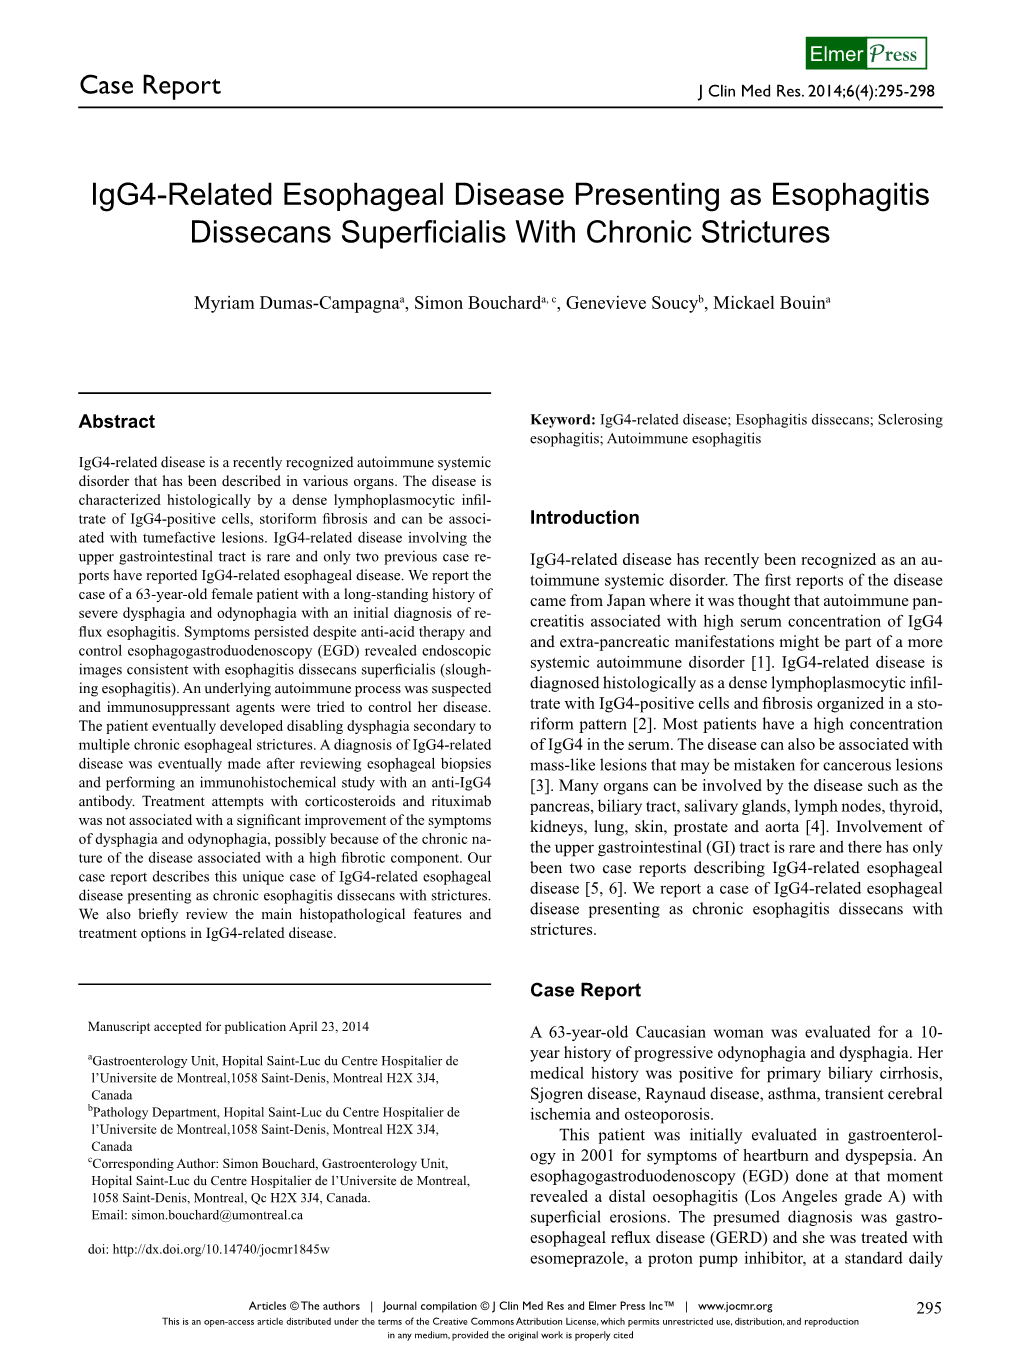 Igg4-Related Esophageal Disease Presenting As Esophagitis Dissecans Superficialis with Chronic Strictures